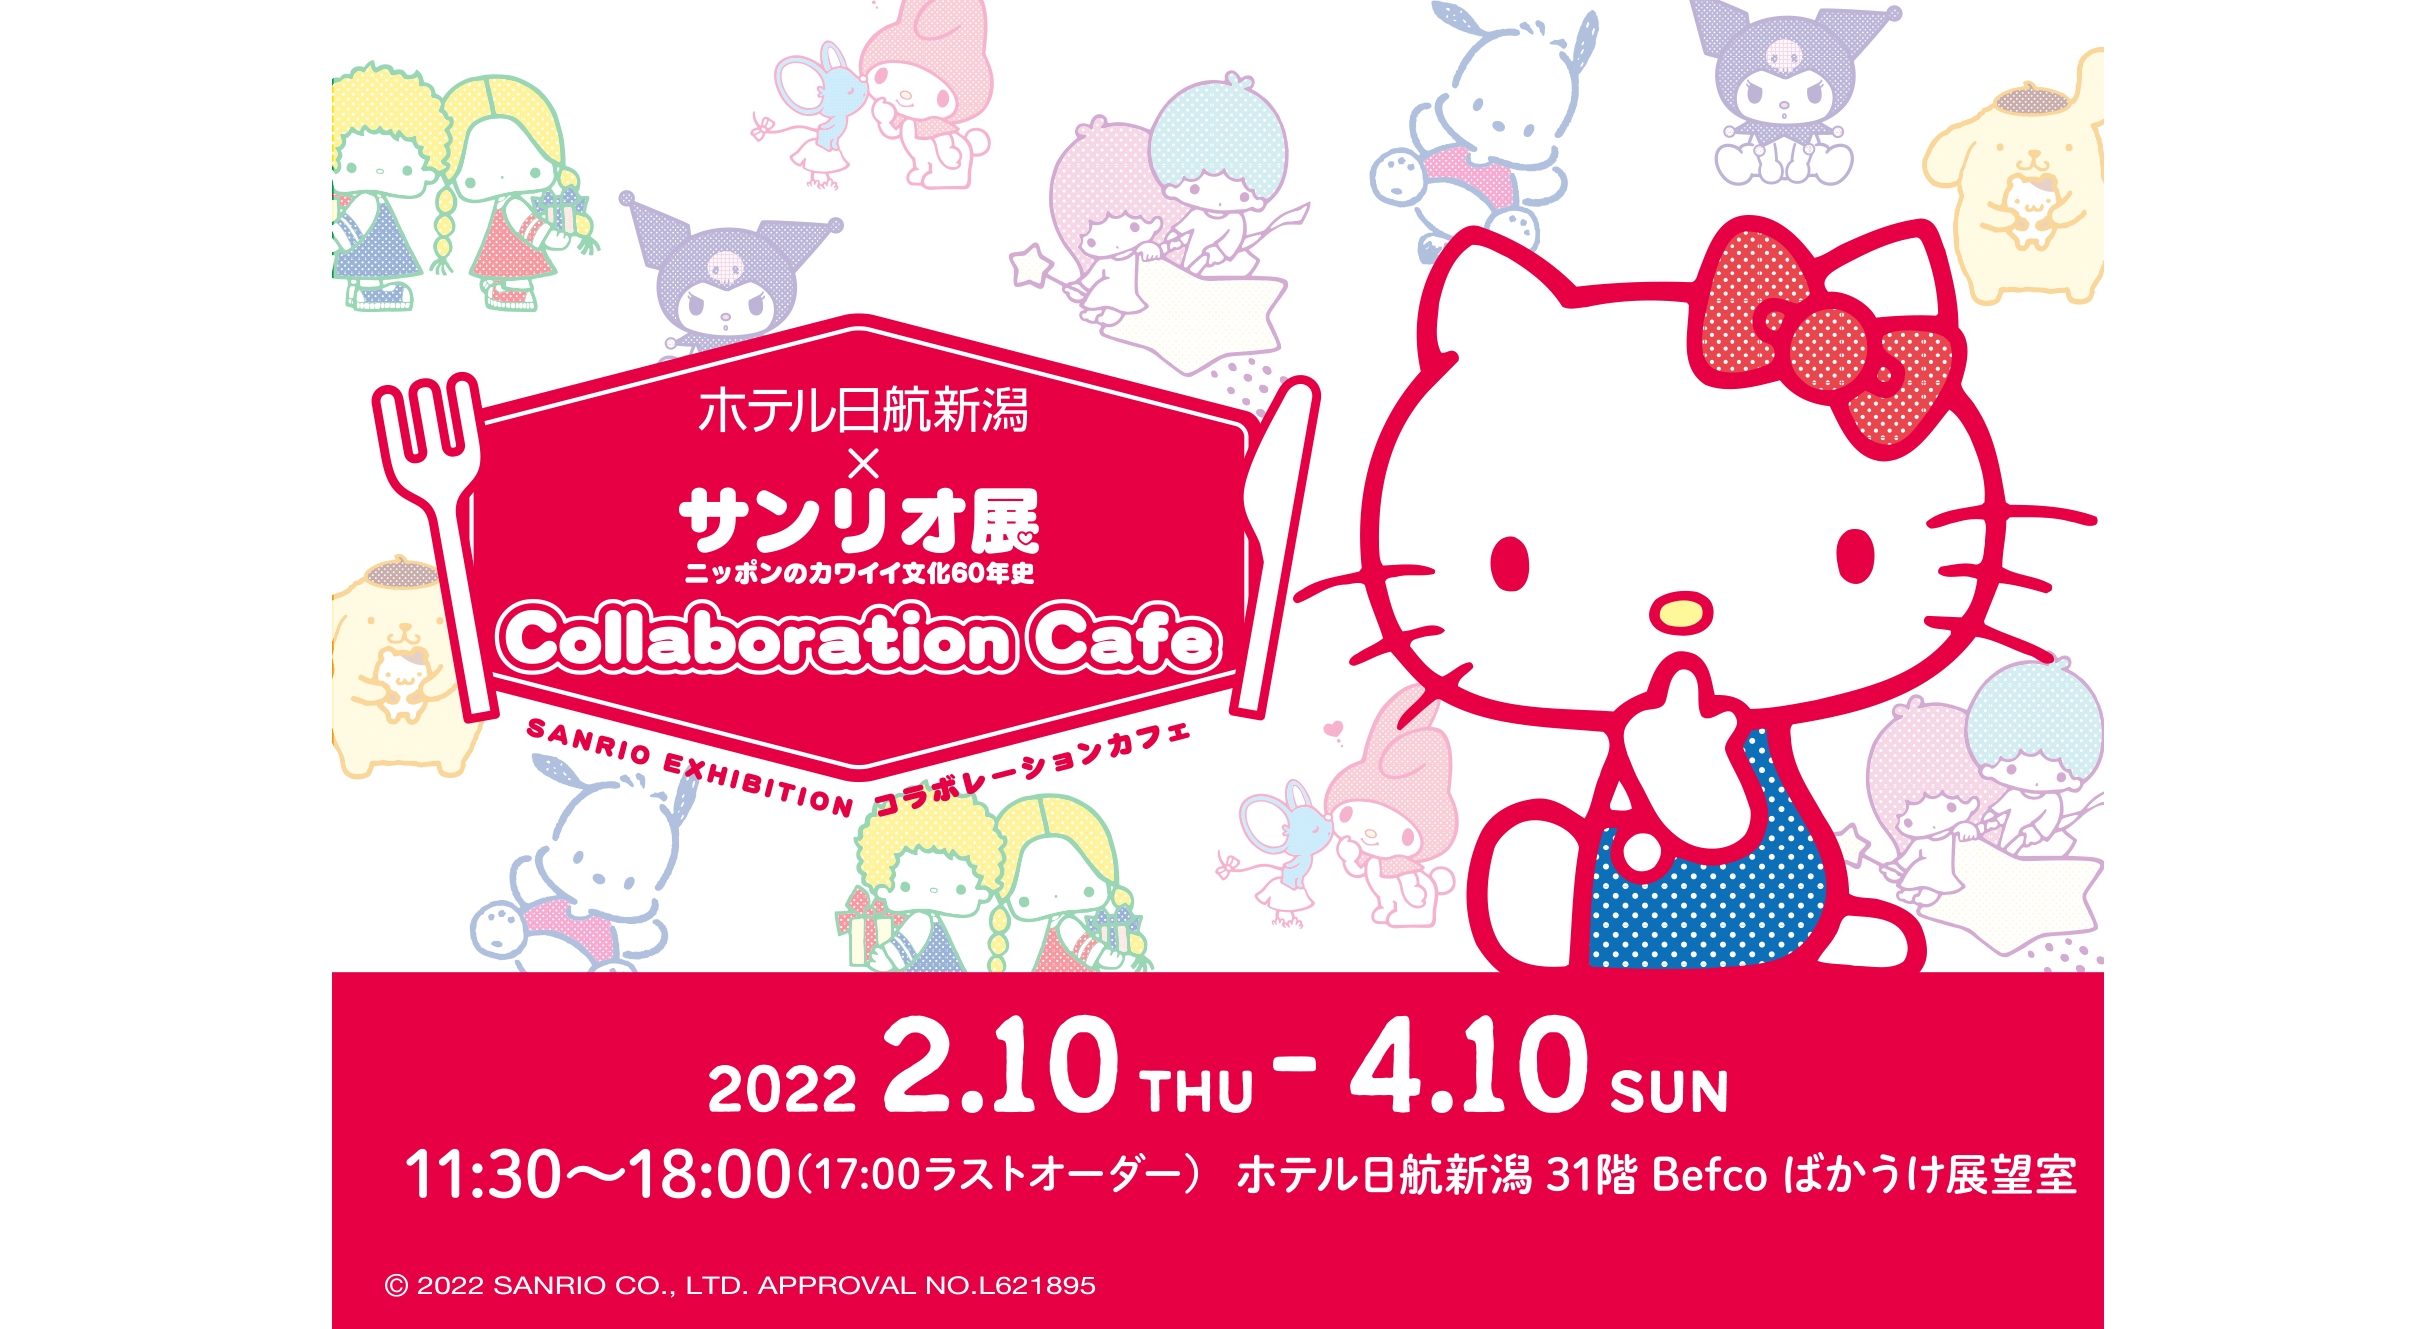 Hello Kitty Mini Cafe Pop-Up opens on the Strip on Friday - Eater